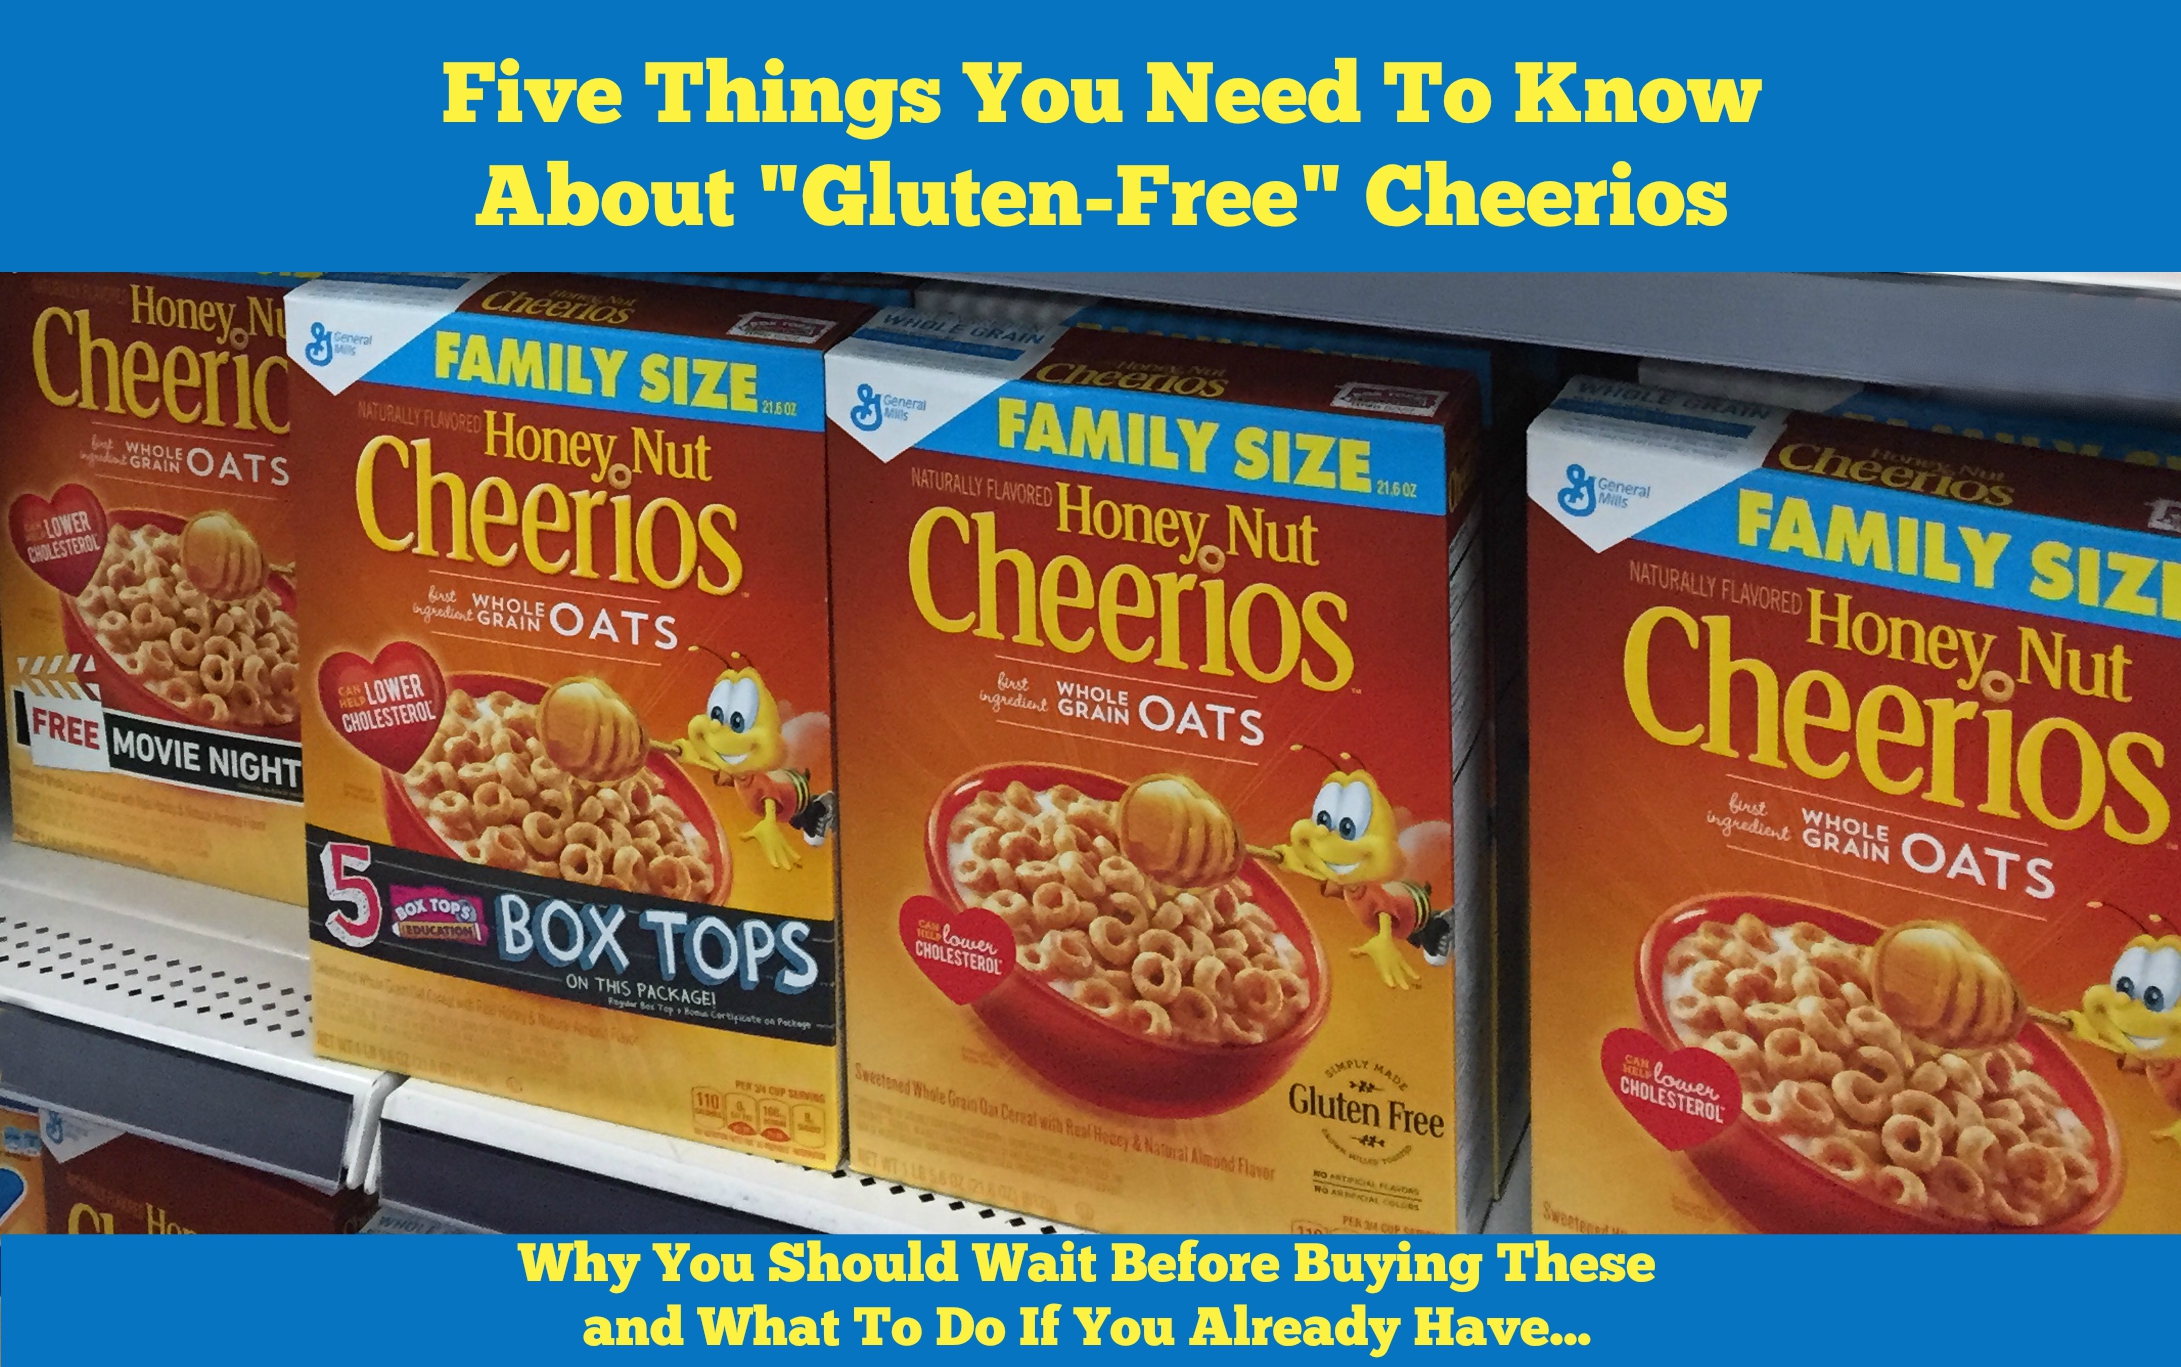 Five Things You Need To Know About "Gluten-Free" Cheerios | In Johnna's Kitchen